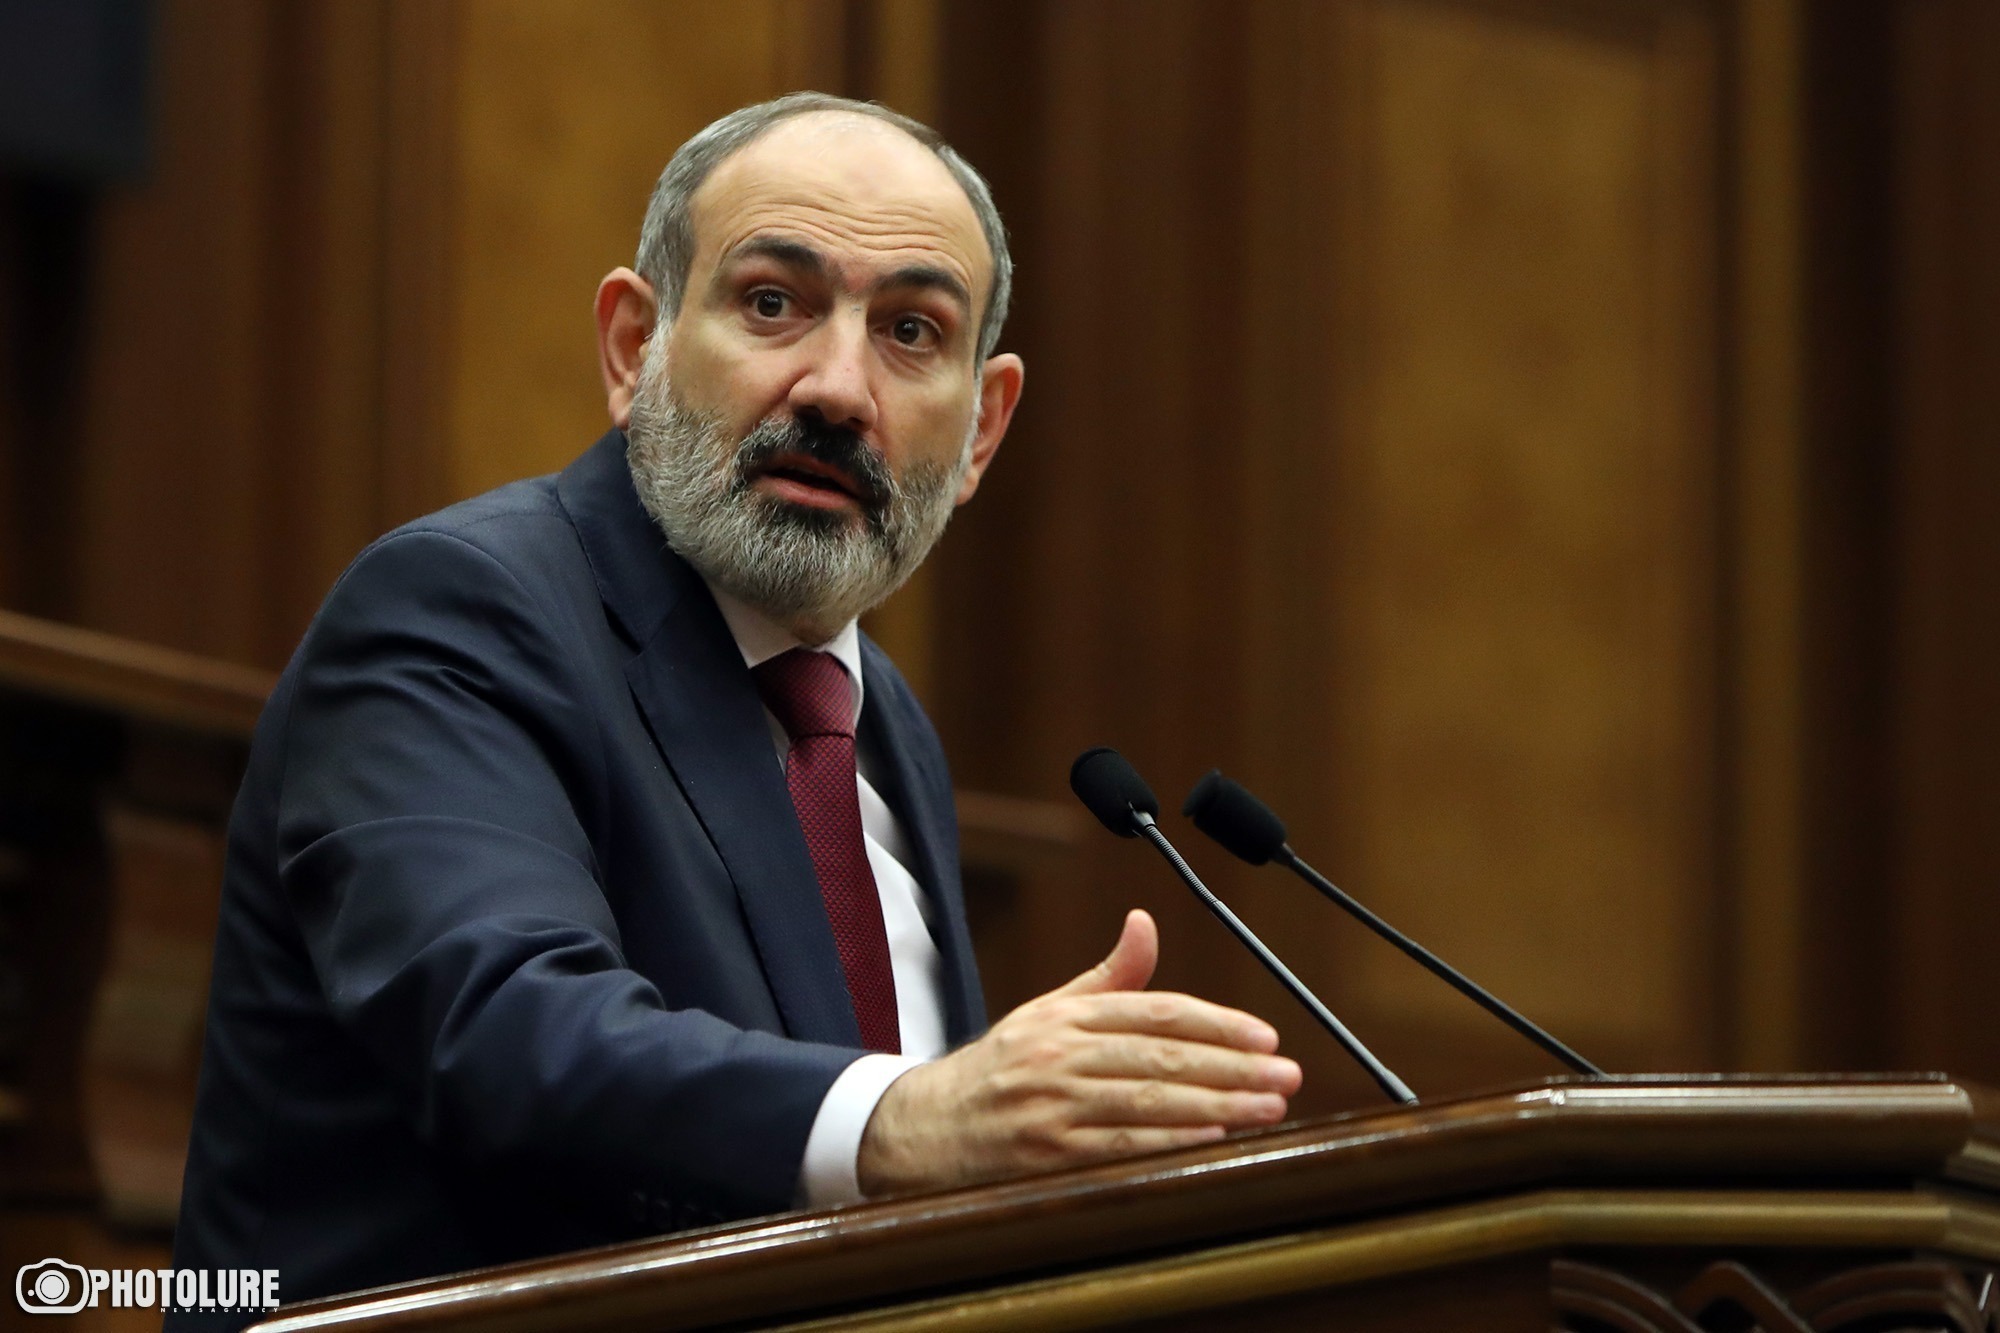 Pashinyan talks negotiations with Azerbaijan, corridor, in first press conference in over a year